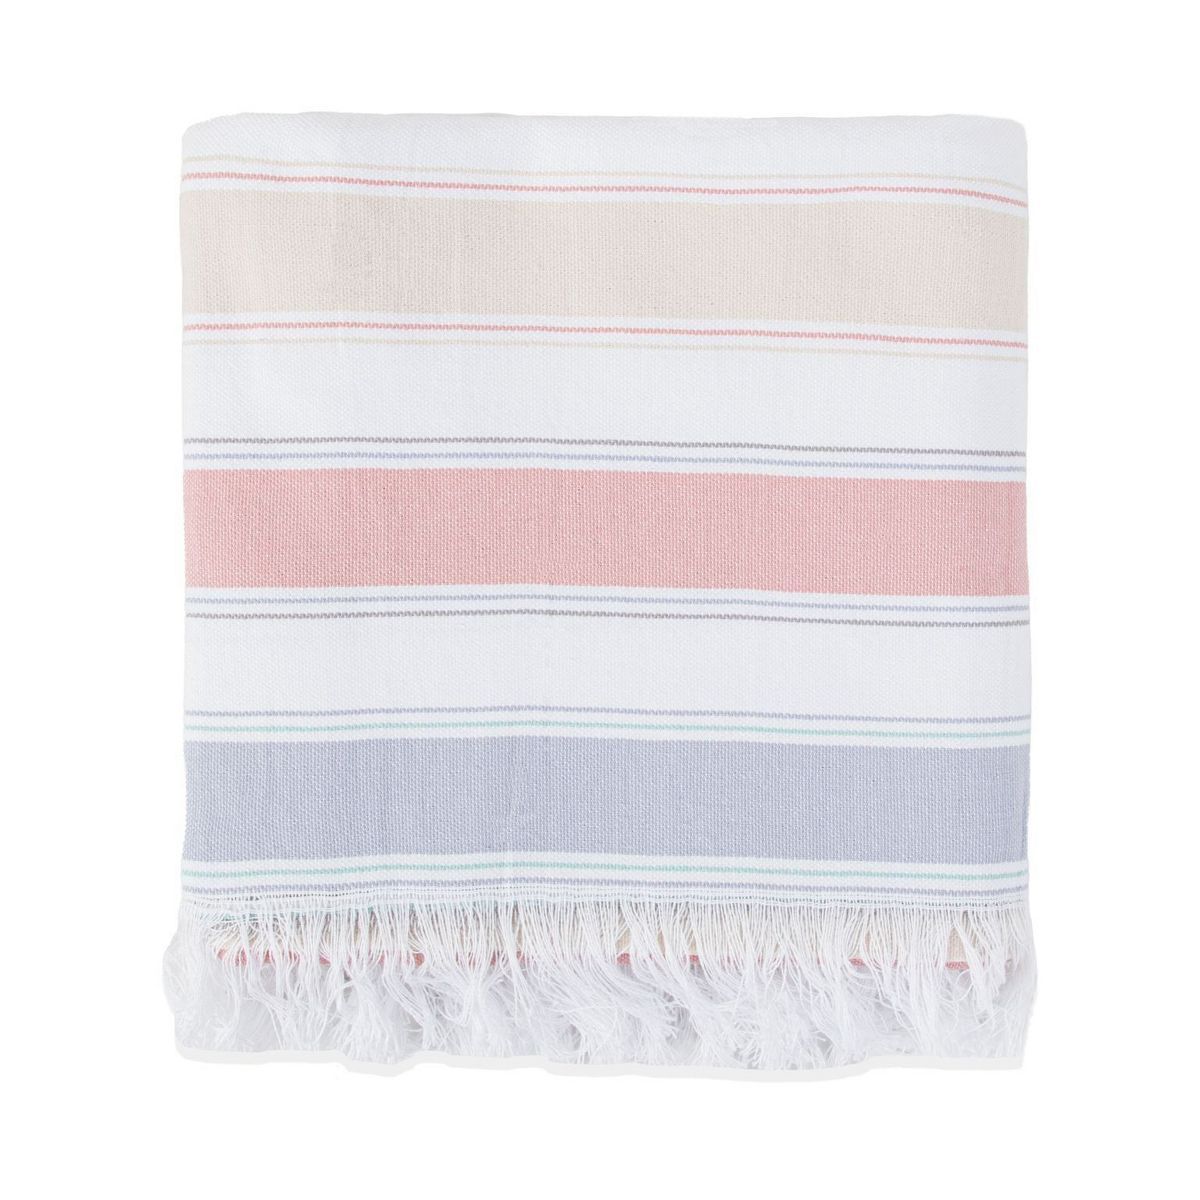 Arkwright Sand Free Beach Towel - 100% Cotton, Striped Design Options - Extra Large 35 x 75 | Target